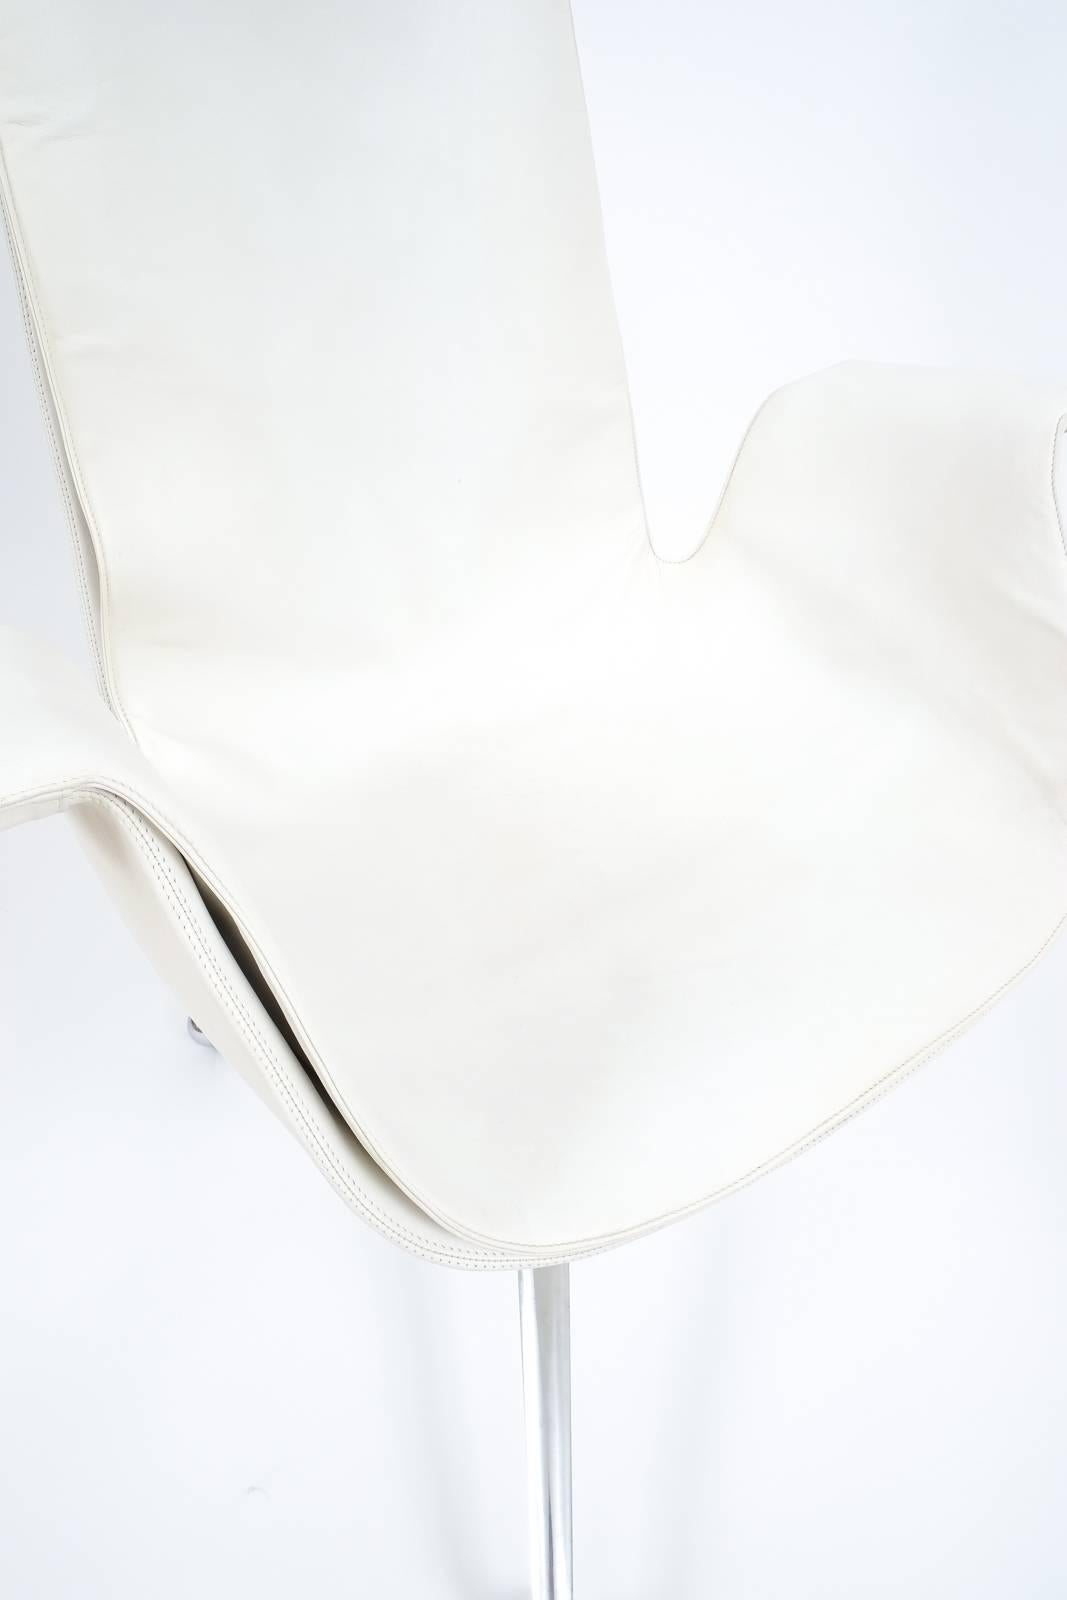 Aluminum Two White High Back Tulip Chairs by Preben Fabricius and Jørgen Kastholm